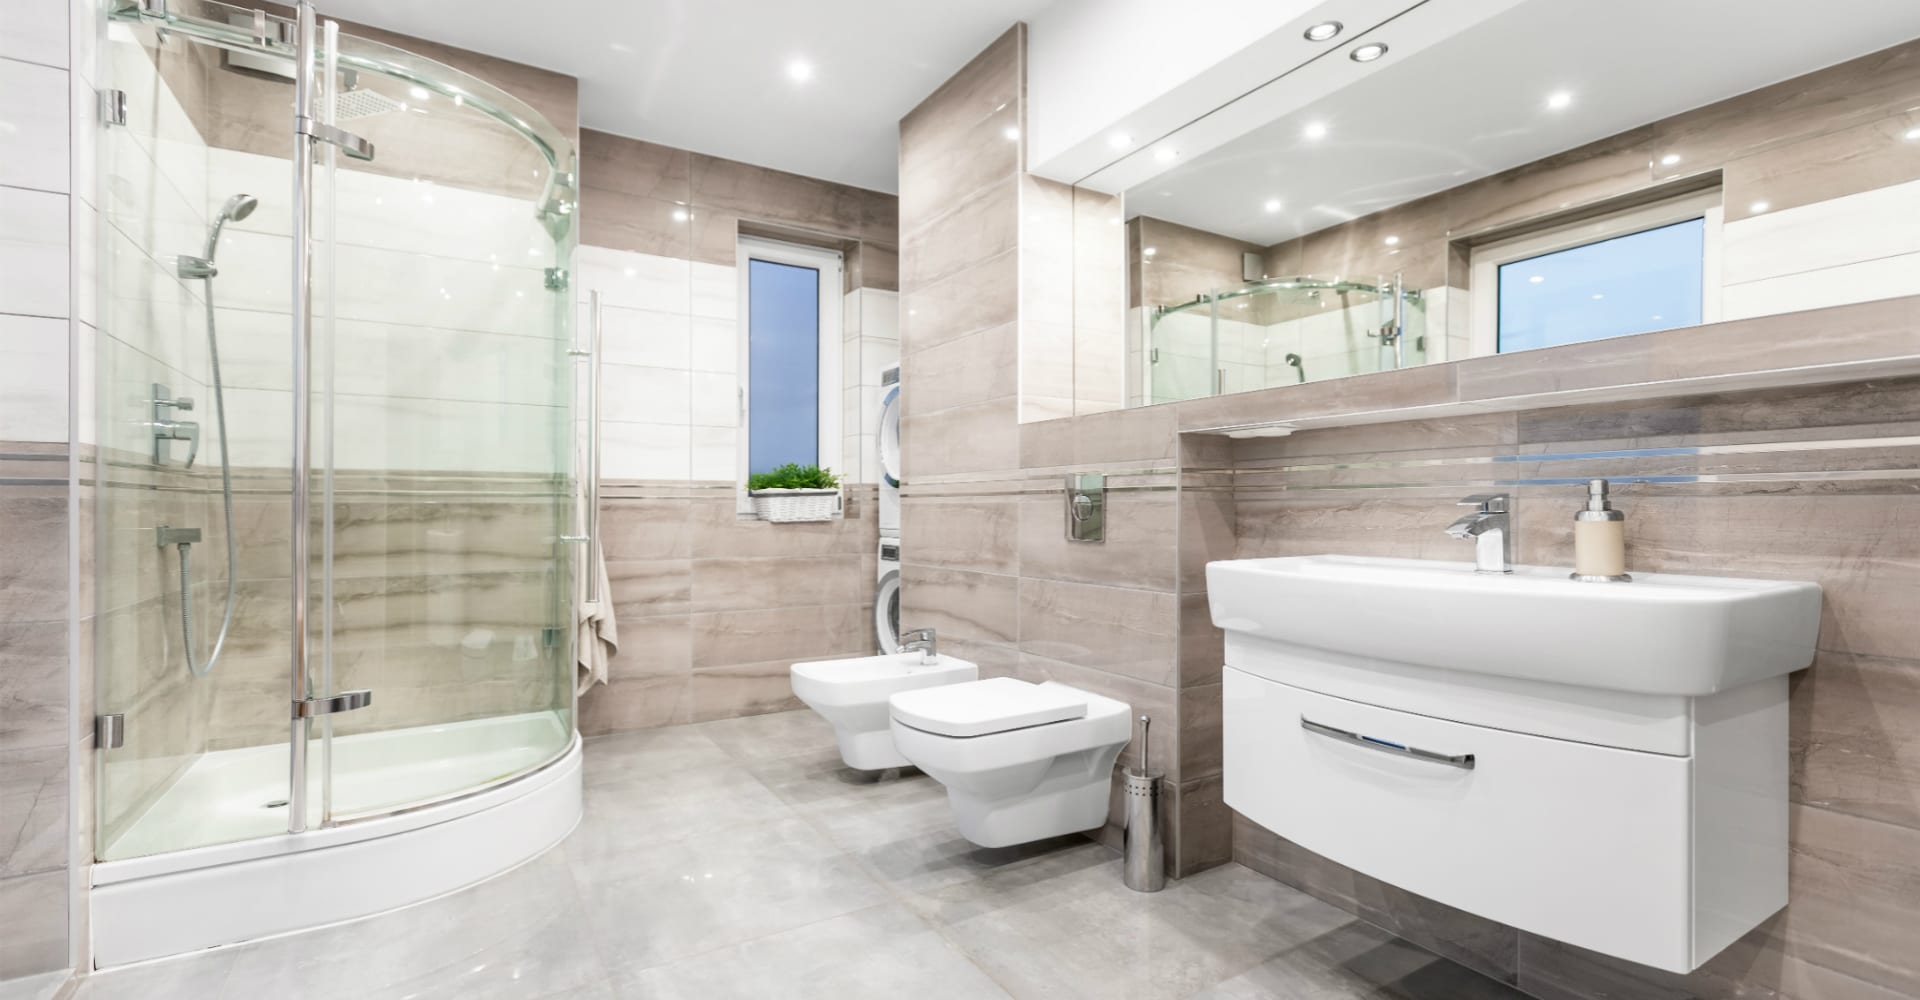 5 Factors that Affect the Cost of a Bathroom Remodel